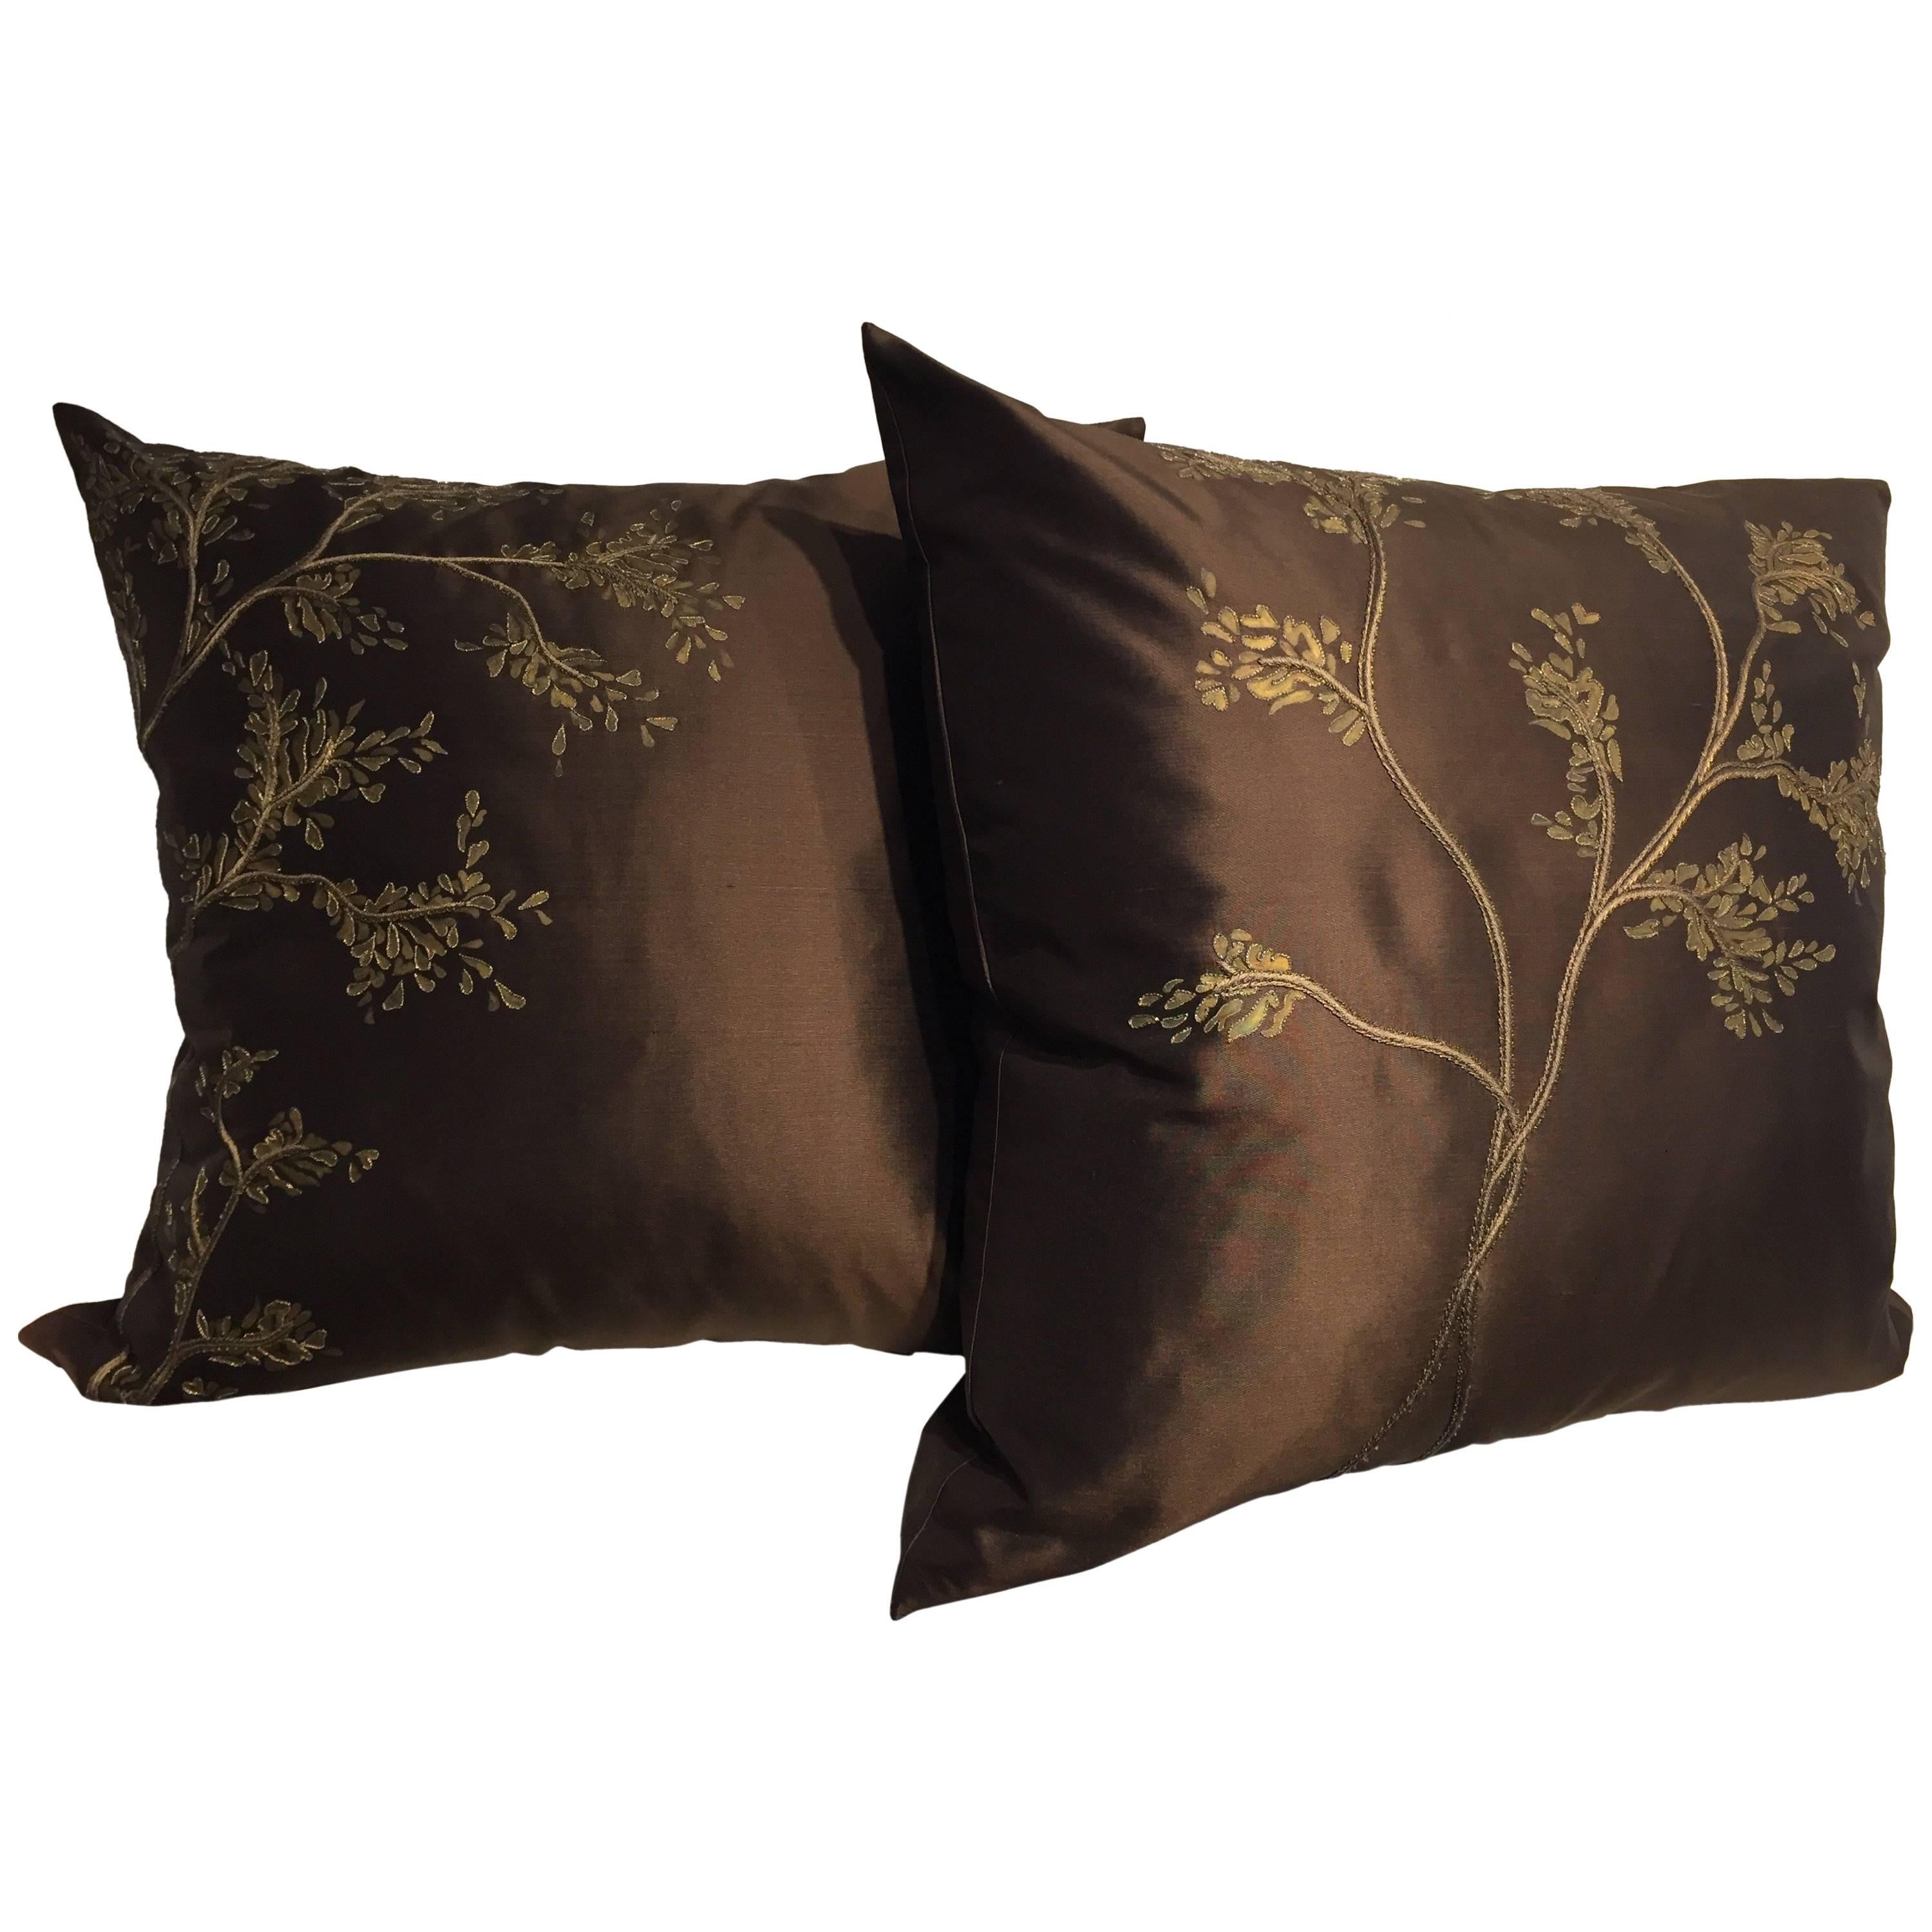 Decorative Silk Cushions with Hand Embroidery and Hand-Painted Color Chocolate For Sale